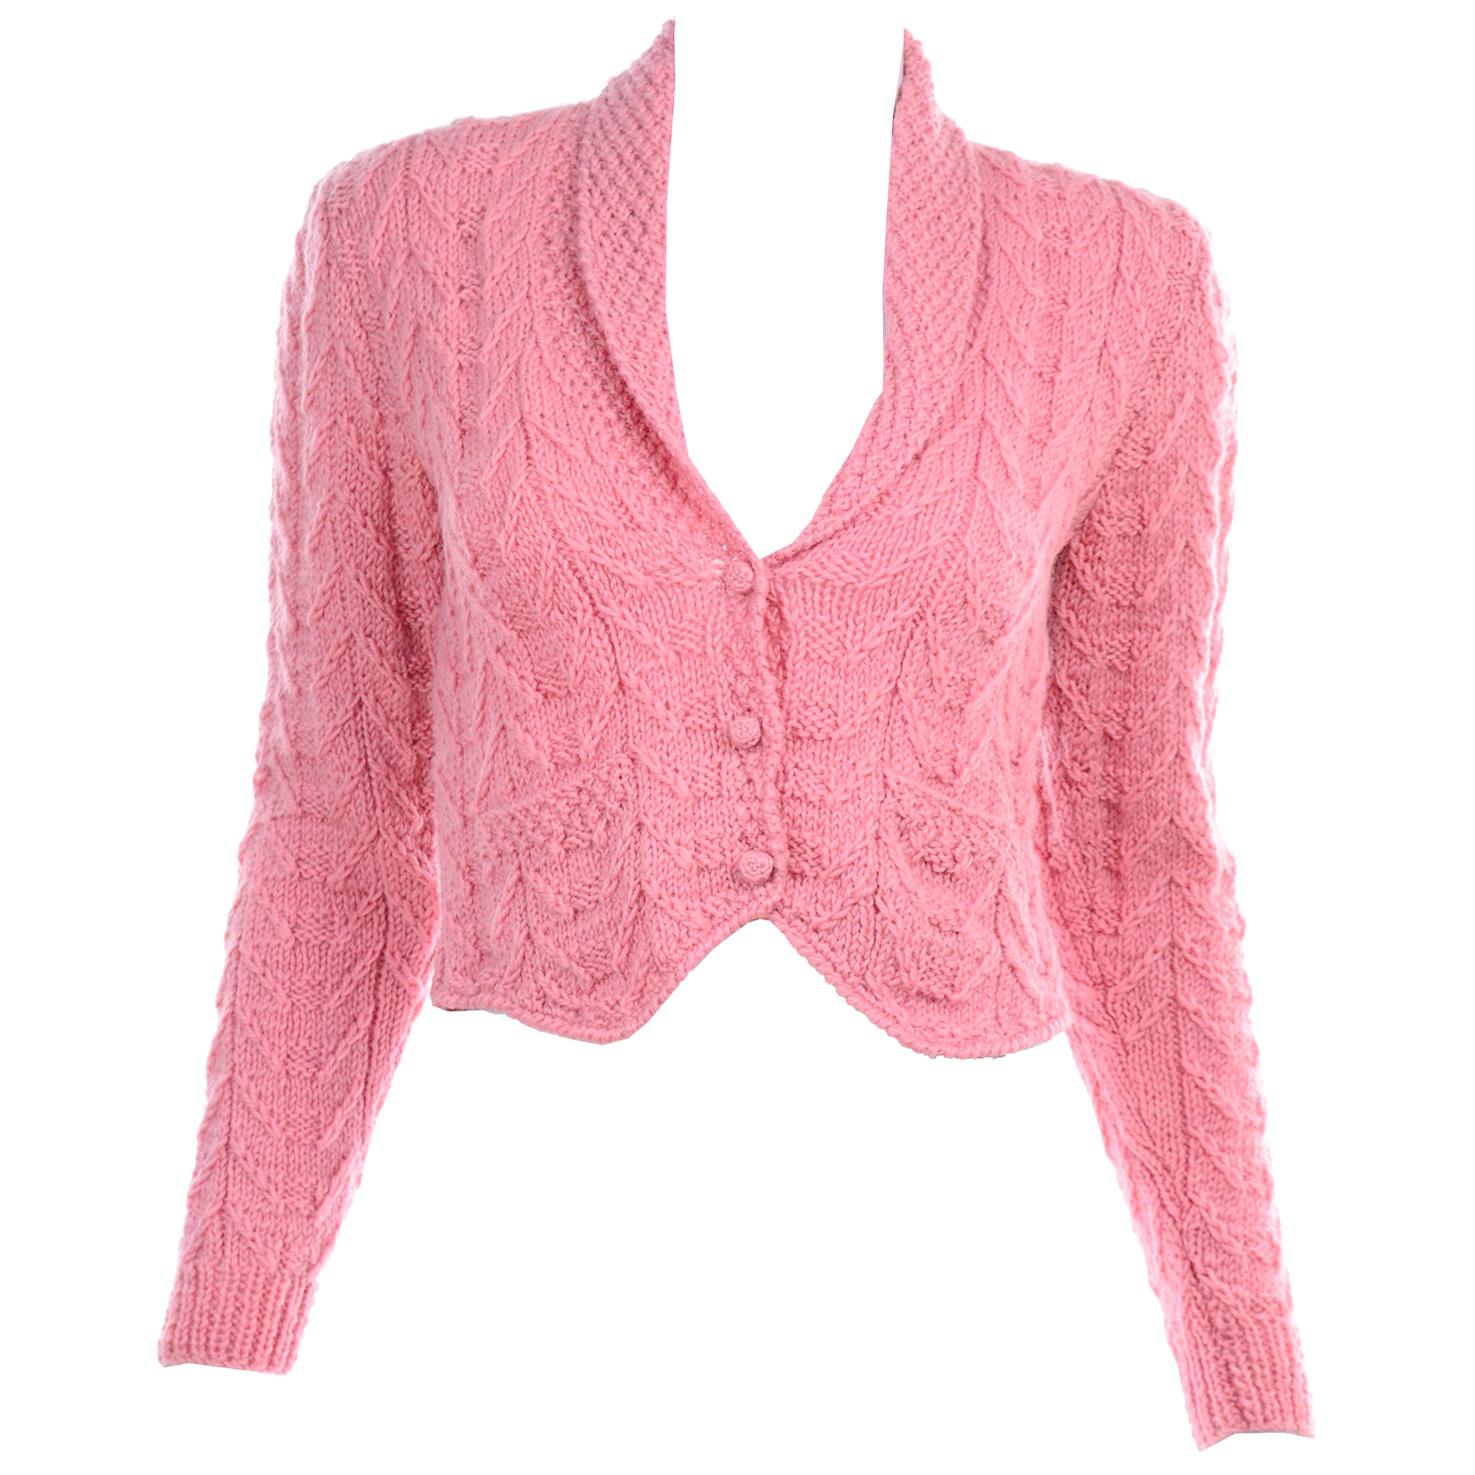 Ralph Lauren Vintage Pink Wool Cardigan Knit Sweater Made in Italy